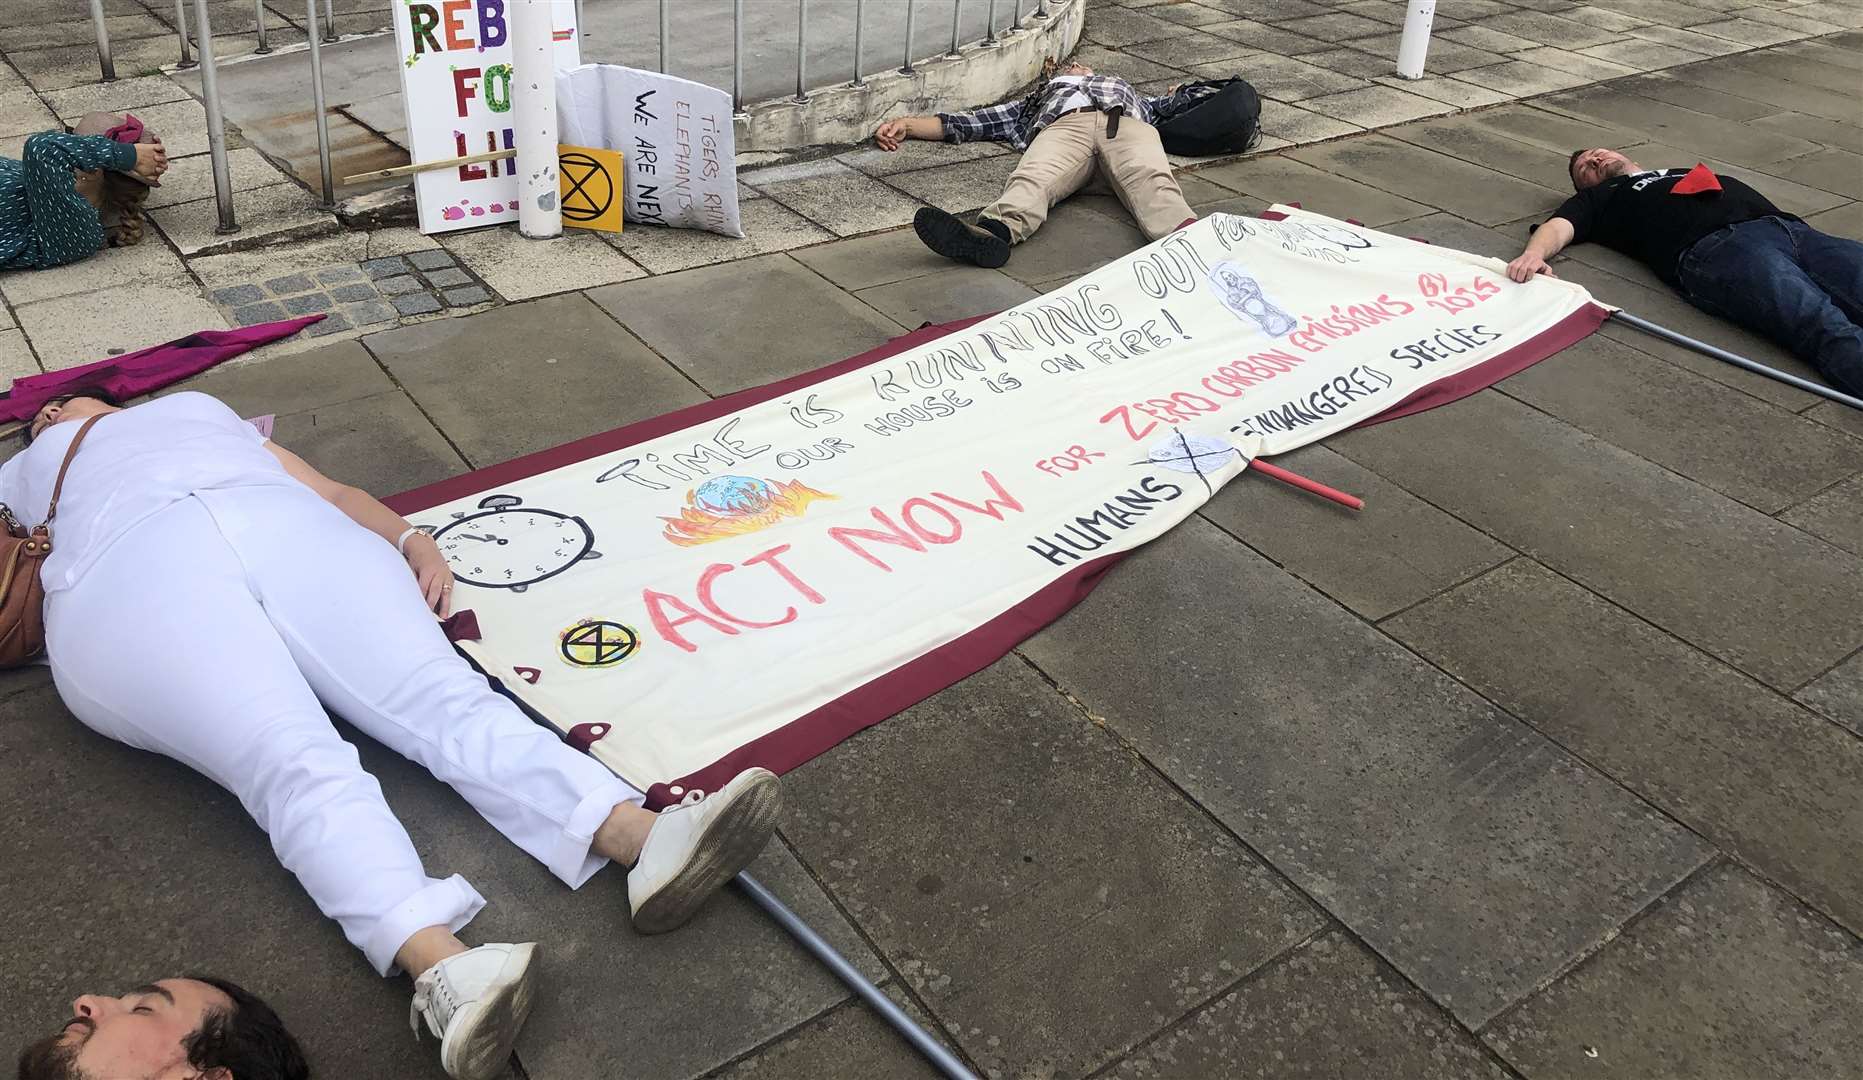 Tunbridge Wells is the latest to declare a climate emergency